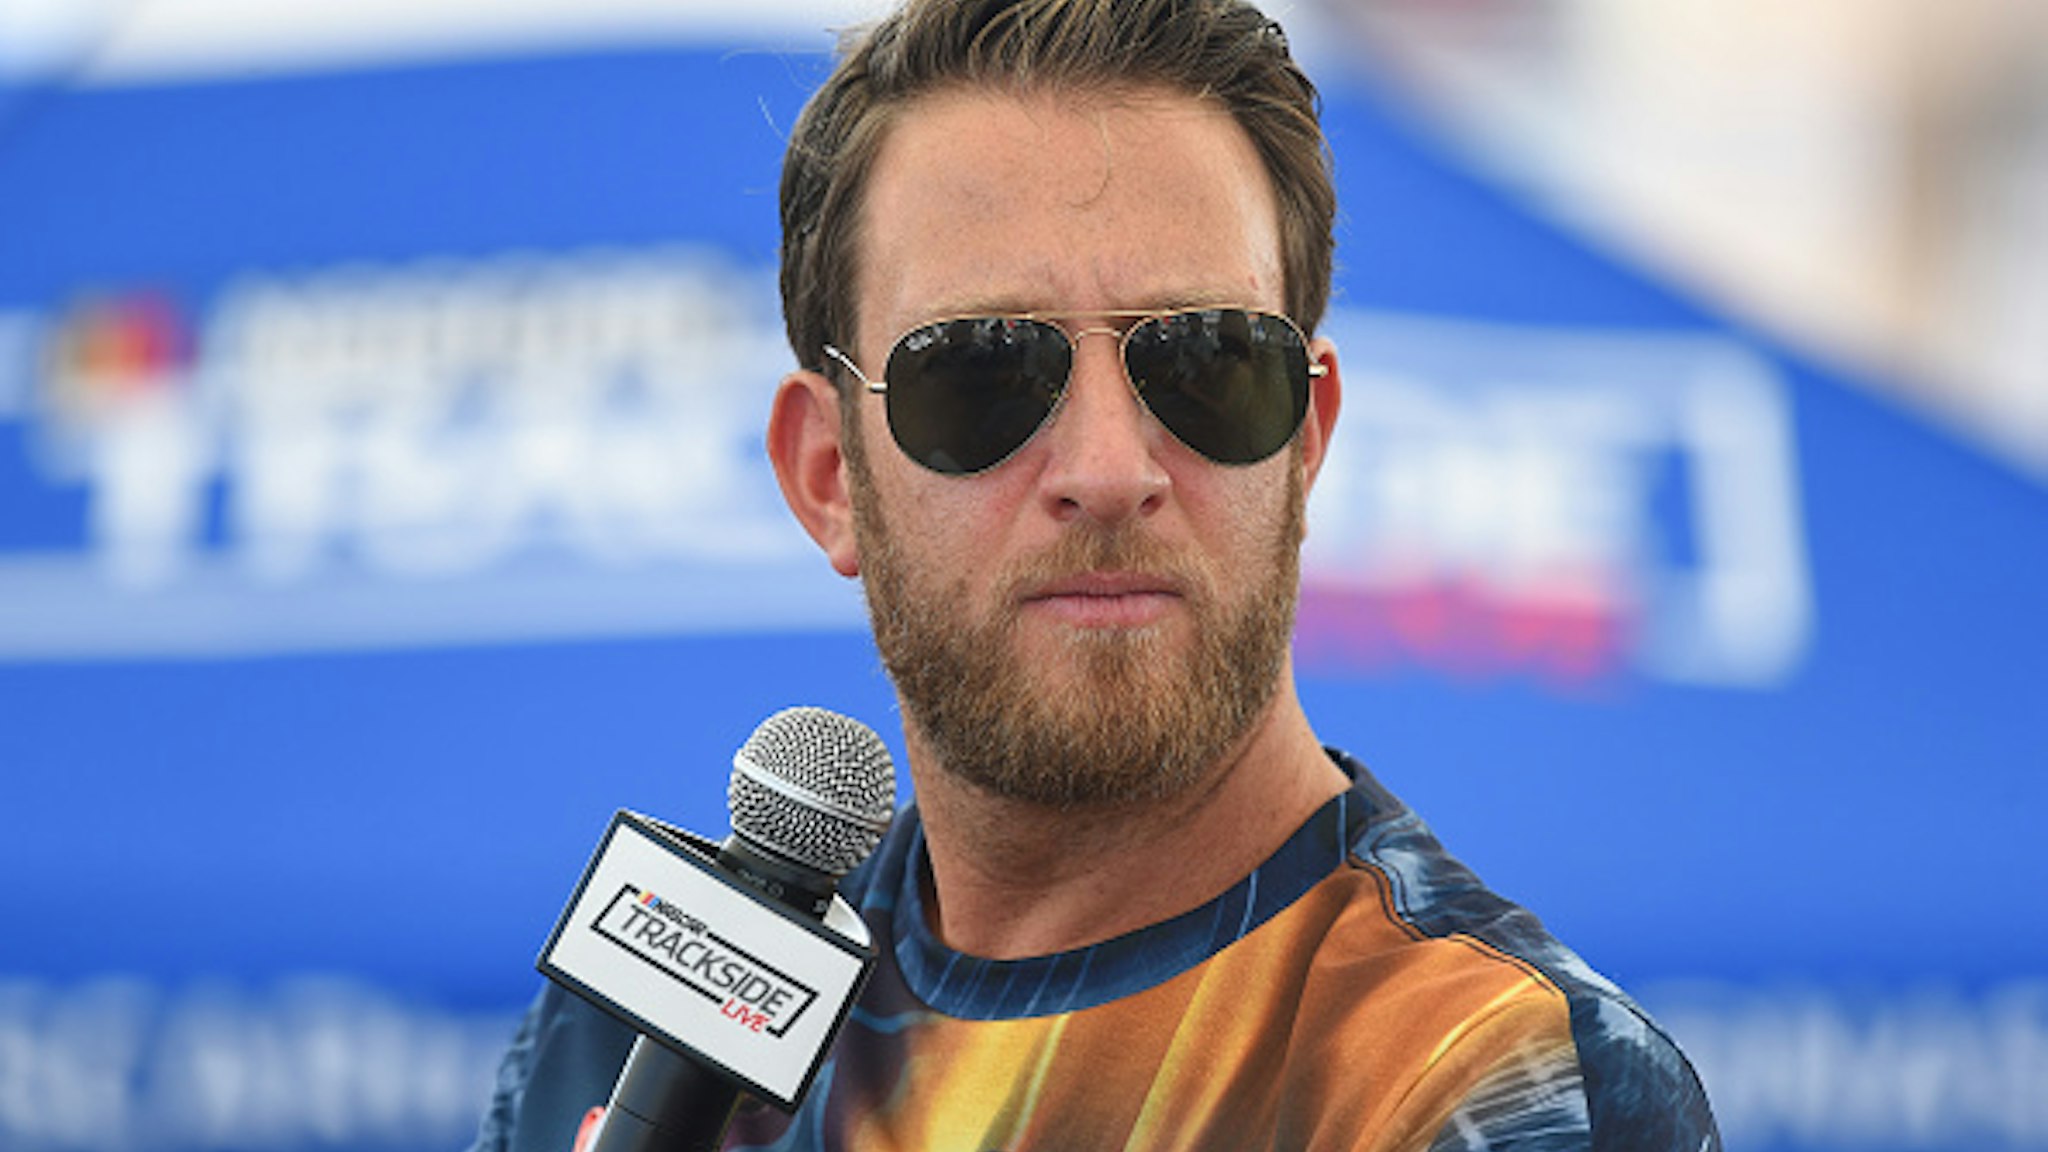 LAS VEGAS, NV - SEPTEMBER 15: David Portnoy, founder of Barstool Sports, is interviewed at the Trackside Live Stage in the LVMS Neon Garage before the South Point 400 Monster Energy NASCAR Cup Series playoff race on September 15, 2019, at Las Vegas Motor Speedway in Las Vegas, NV.